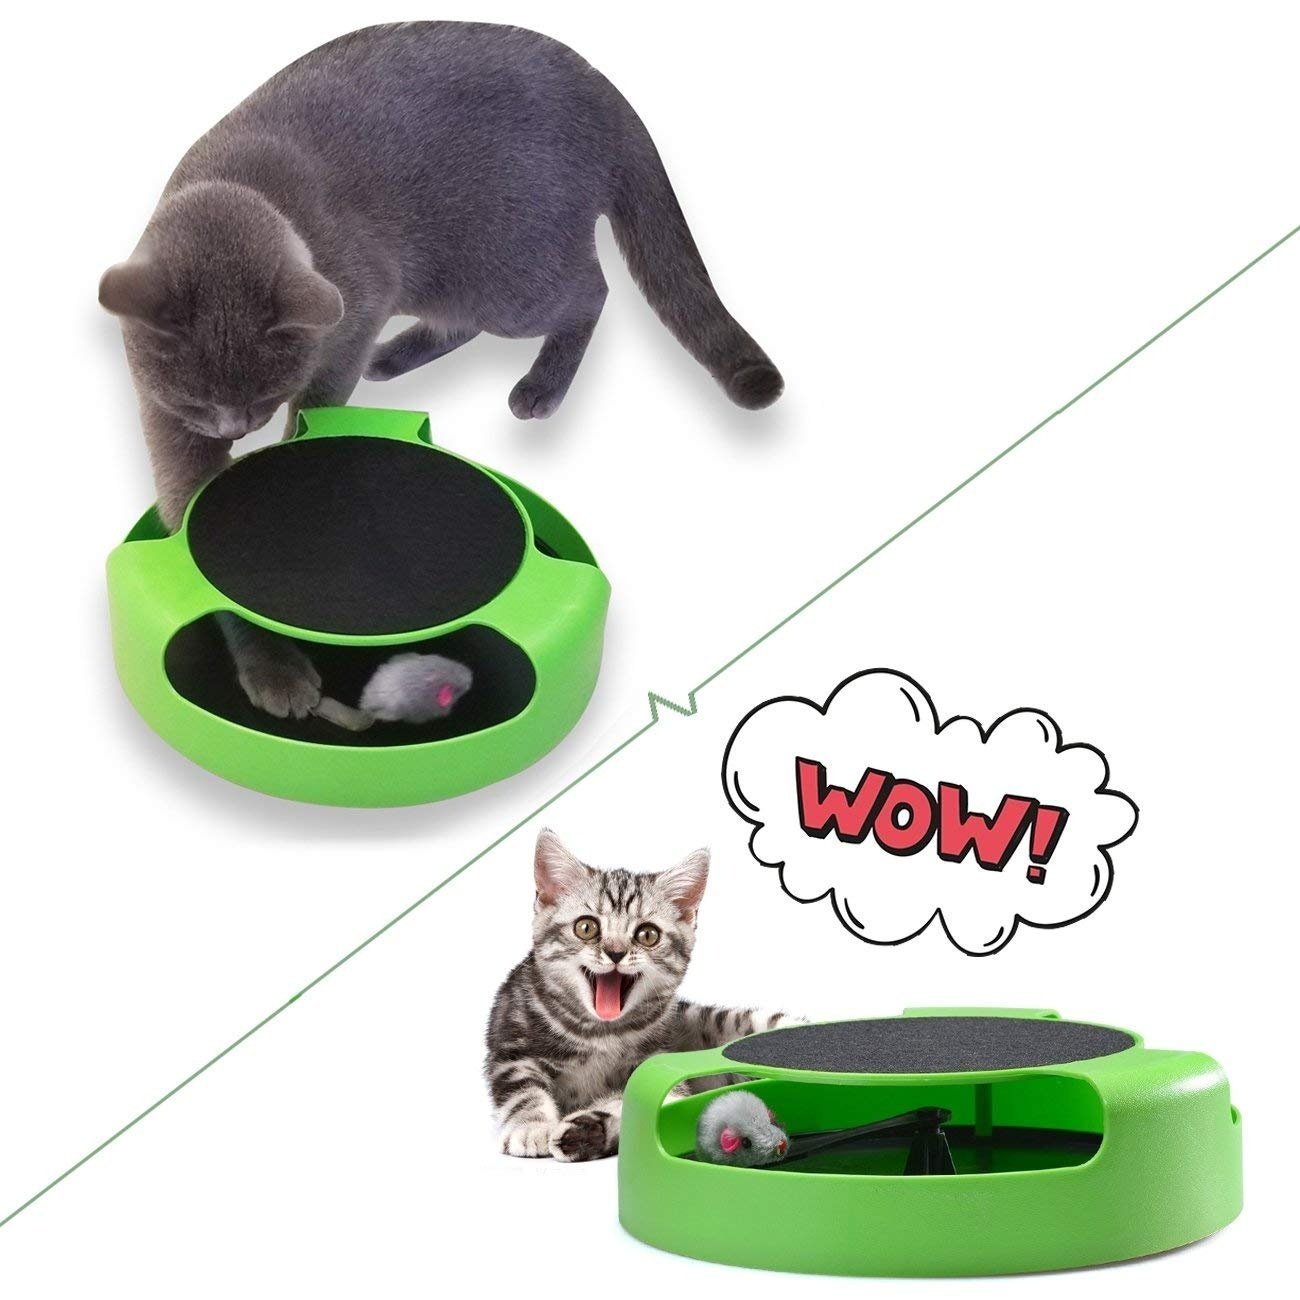 mundal-scratching-pad-catch-the-mouse-cat-scratcher-catnip-toy-pp-polypropylene-squeaky-toy-for-cat